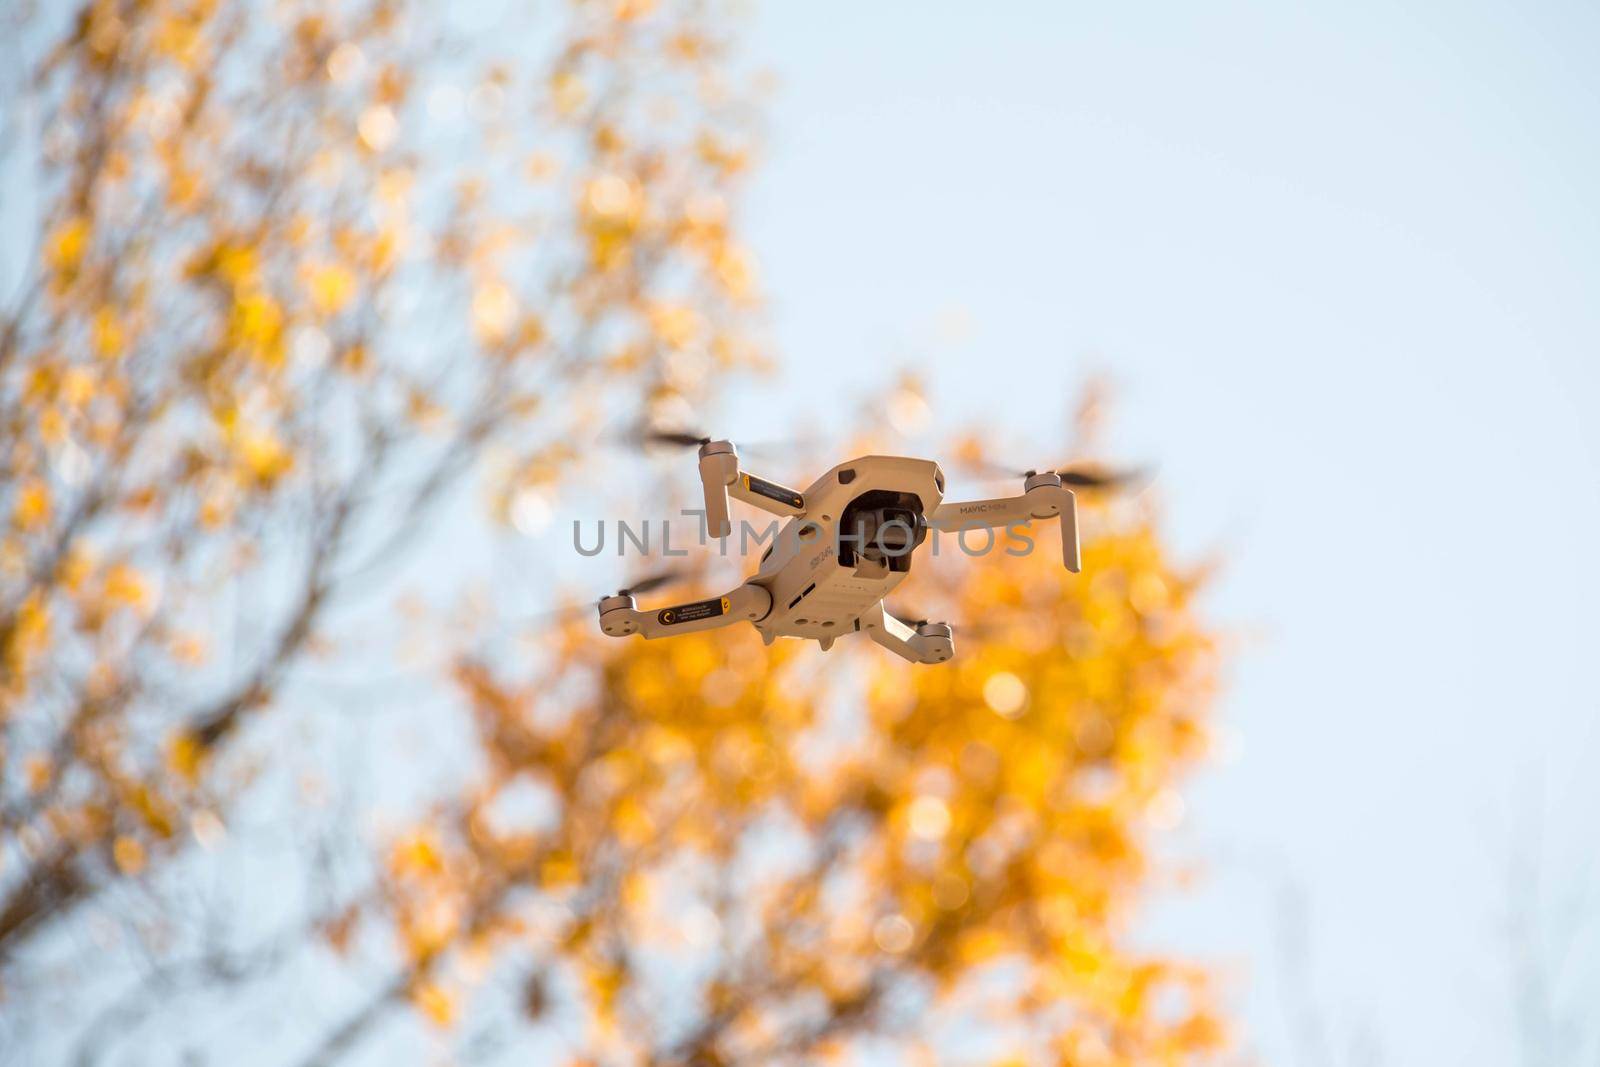 Flying drone taking pictures of autumn landscape. Blue sky, yellow leaves.